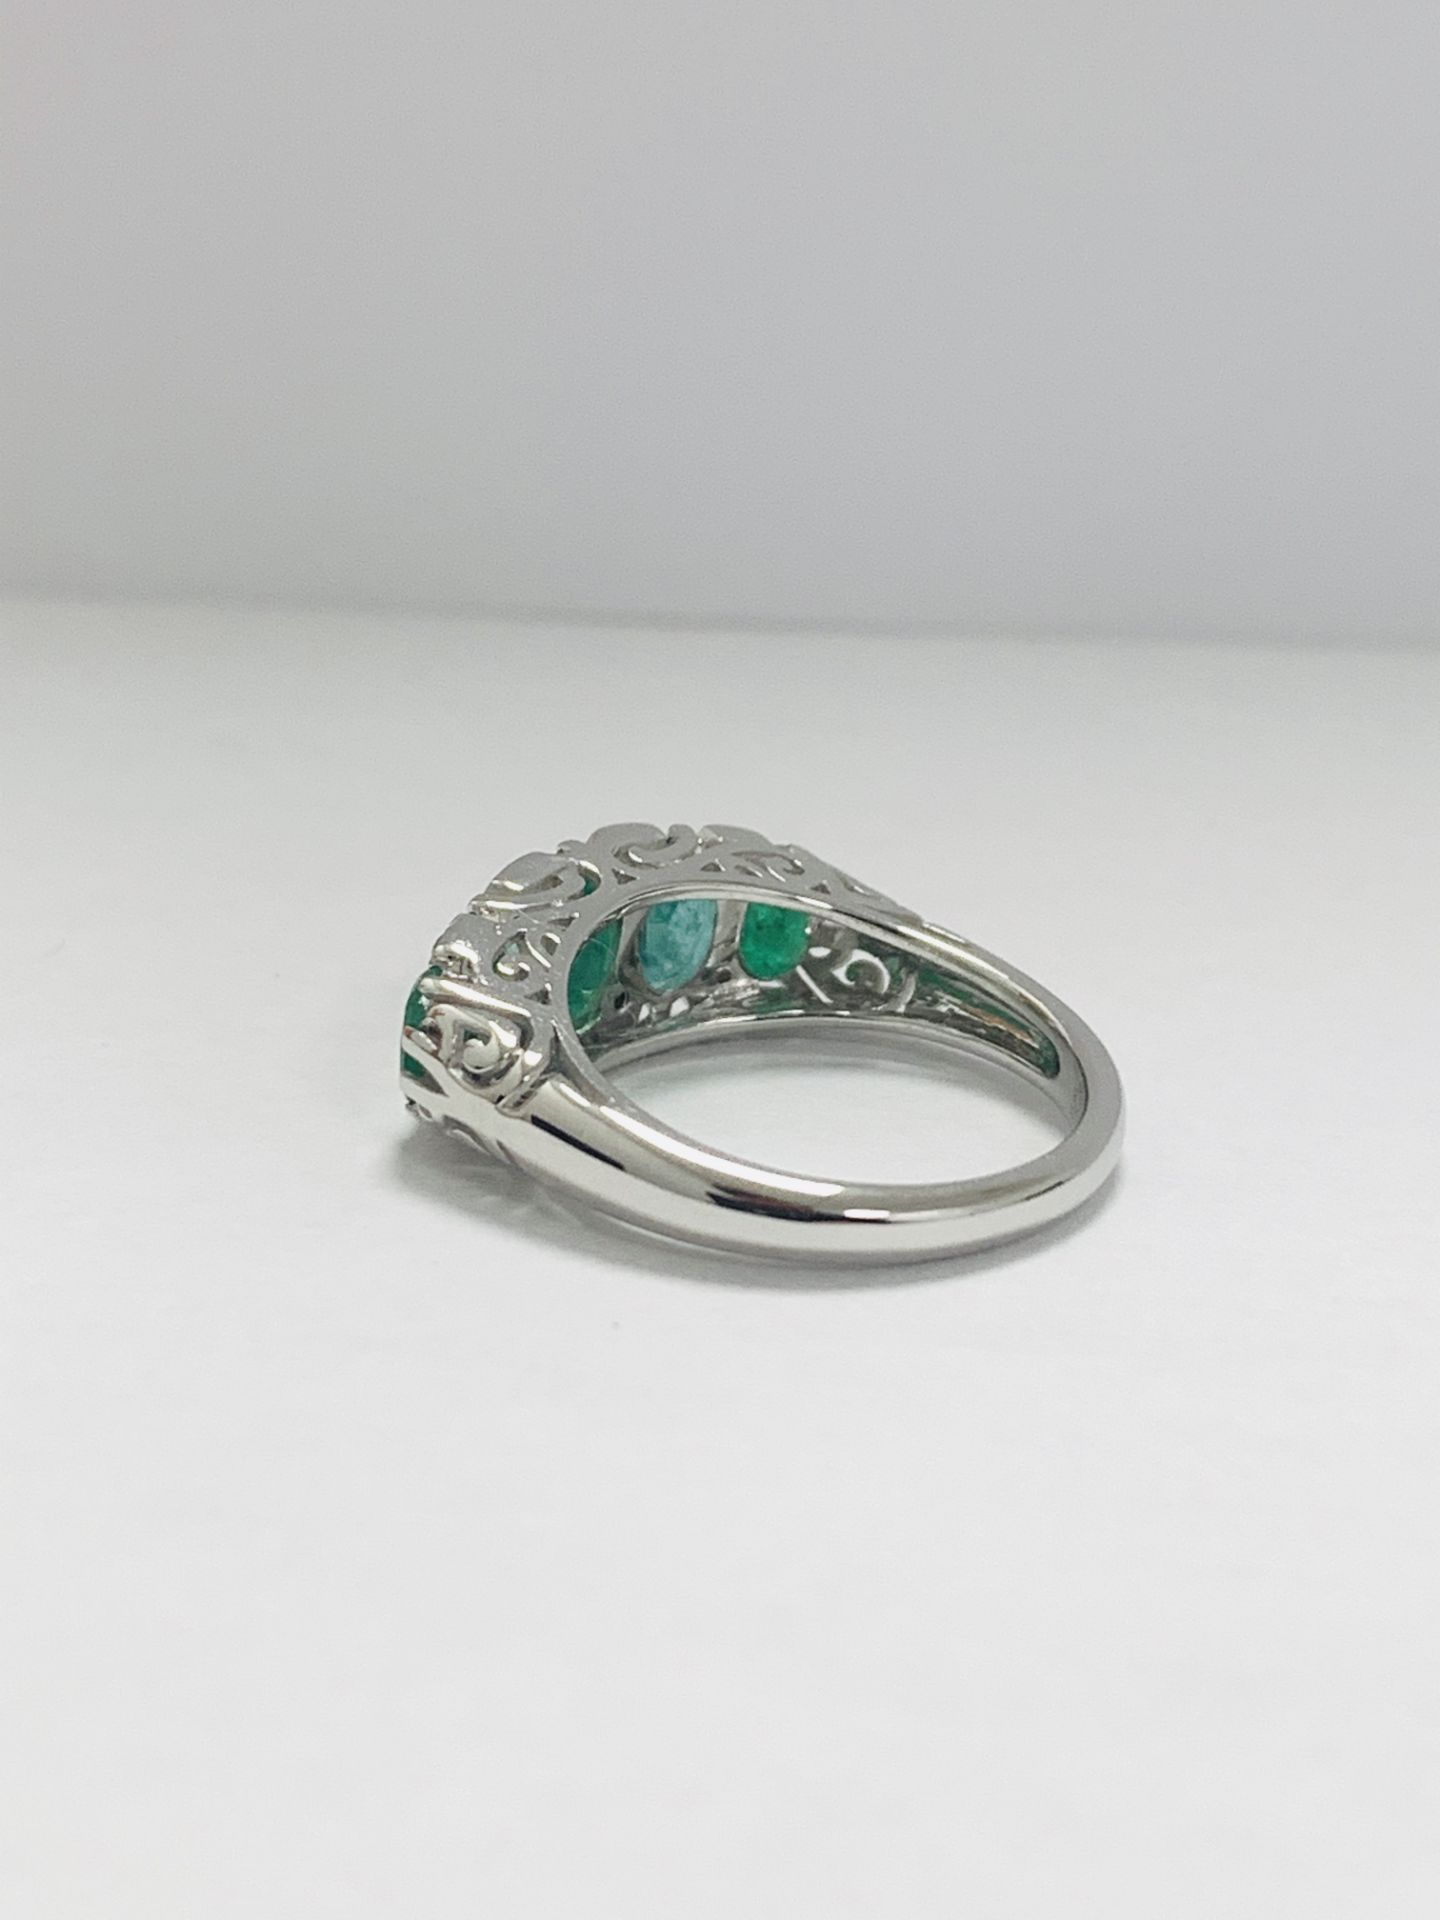 14Ct White Gold Emerald And Diamond Ring - Image 3 of 9